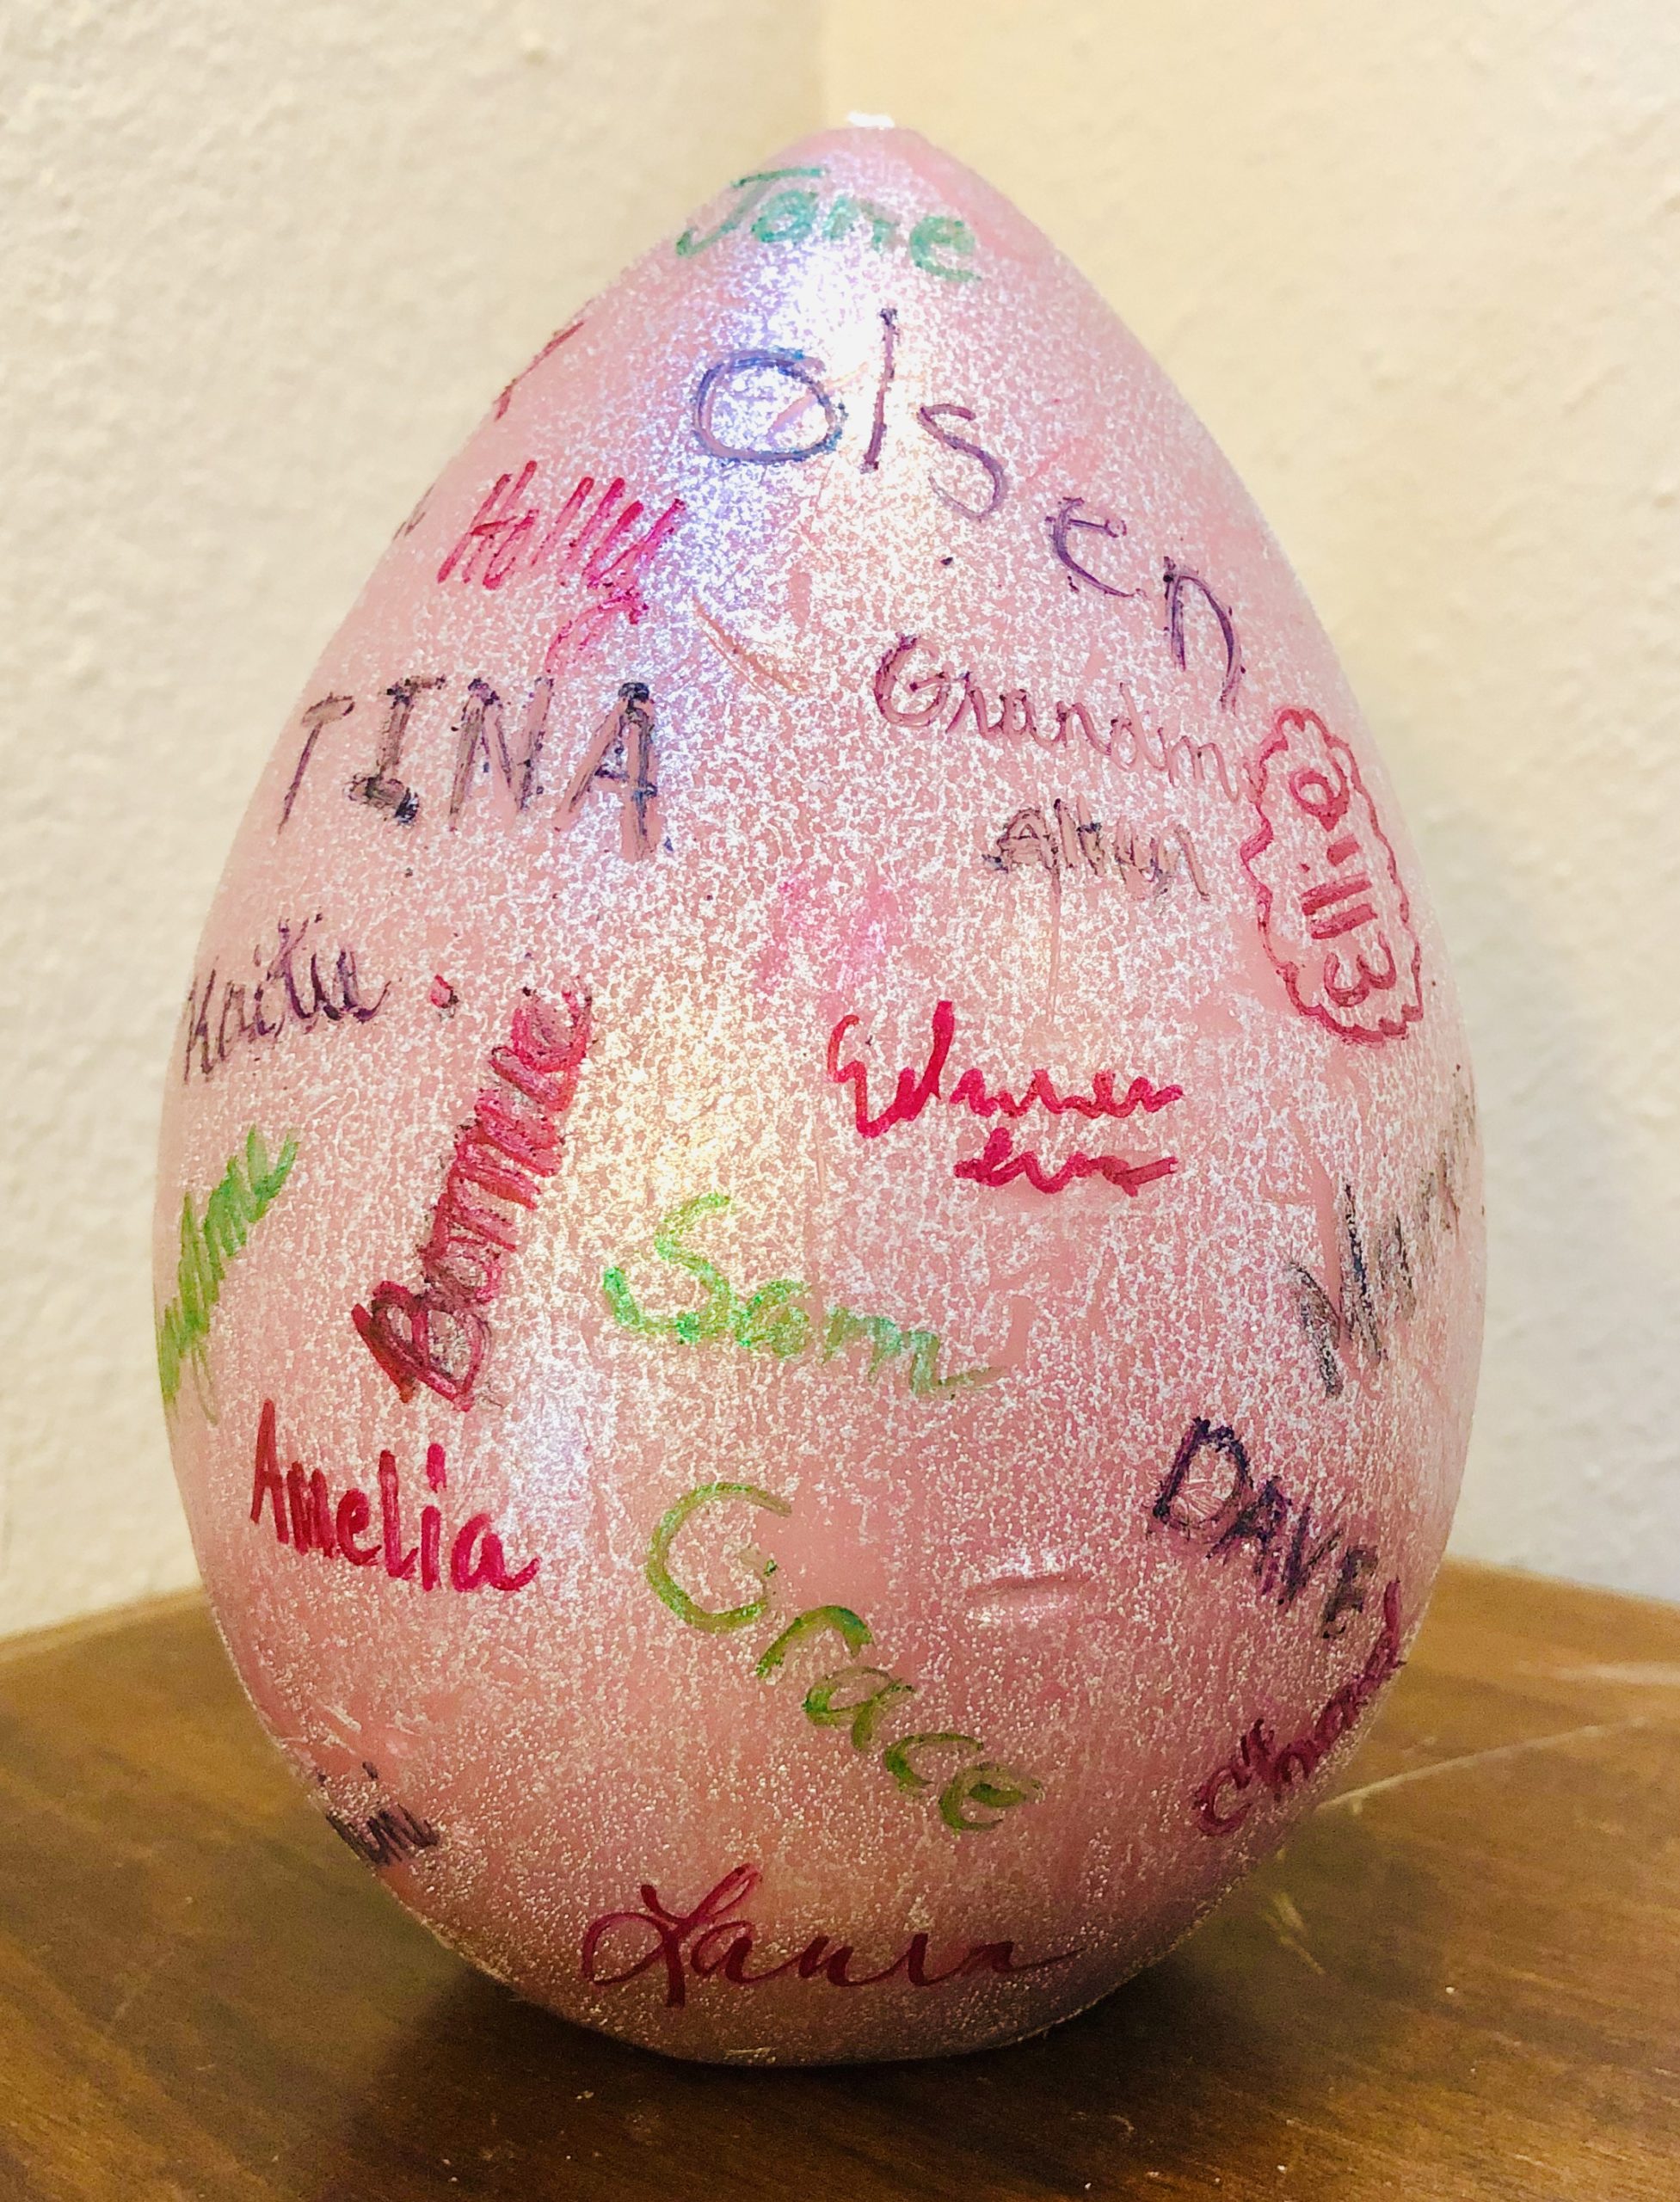 The pink, ceramic Easter Egg with family names written on it from a mystery short story for kids called The Case of the Missing Easter Egg